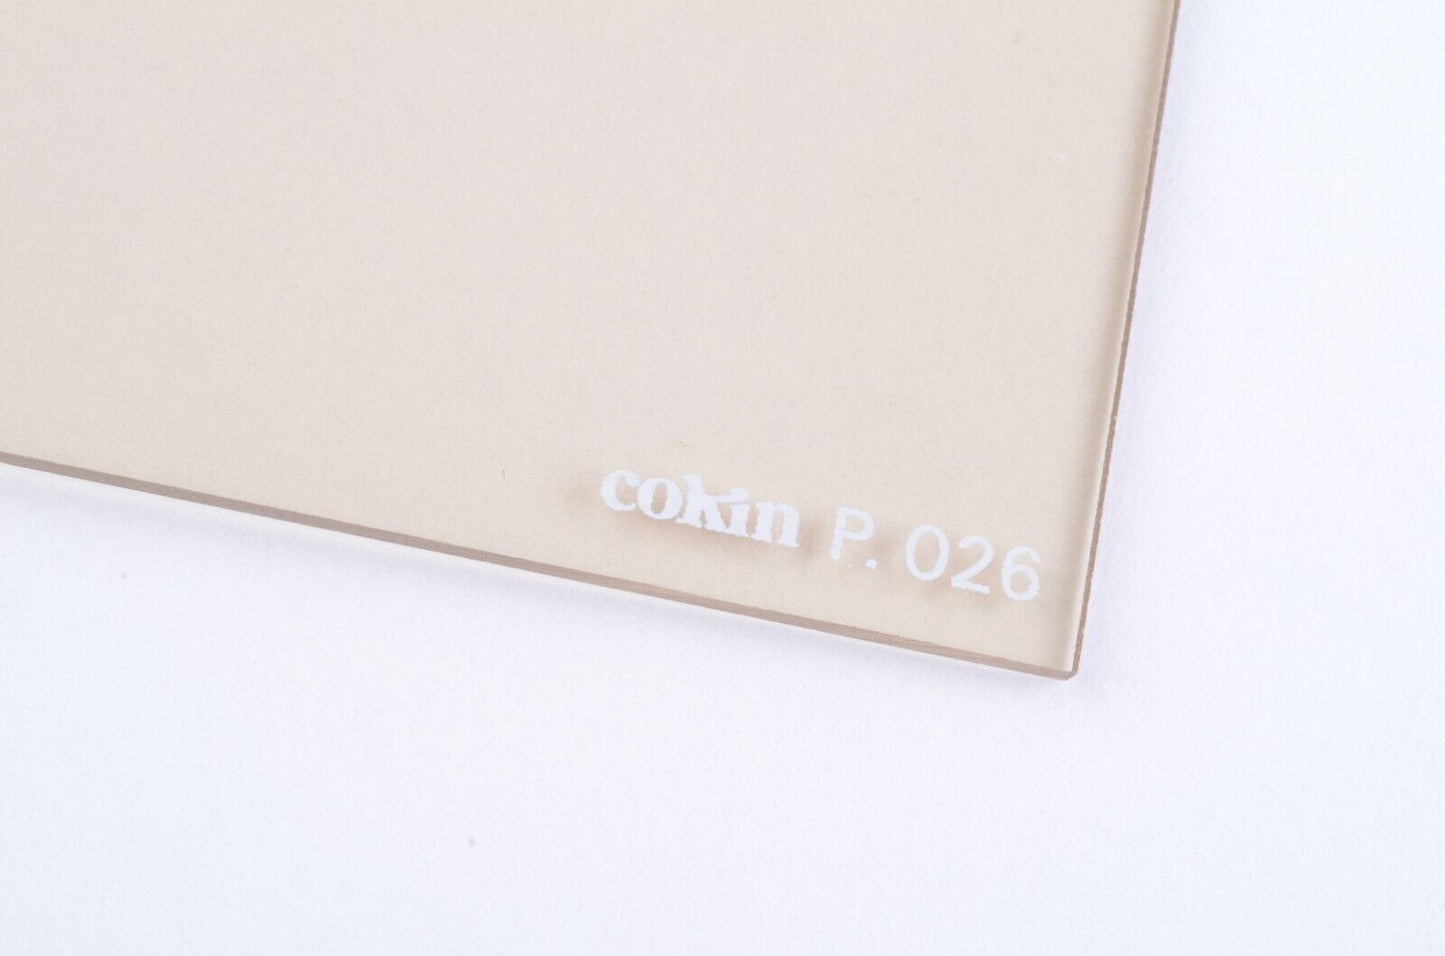 EXC++ COKIN 81A P SERIES P026 FILTER IN JEWEL CASE + 1/3 COEF.